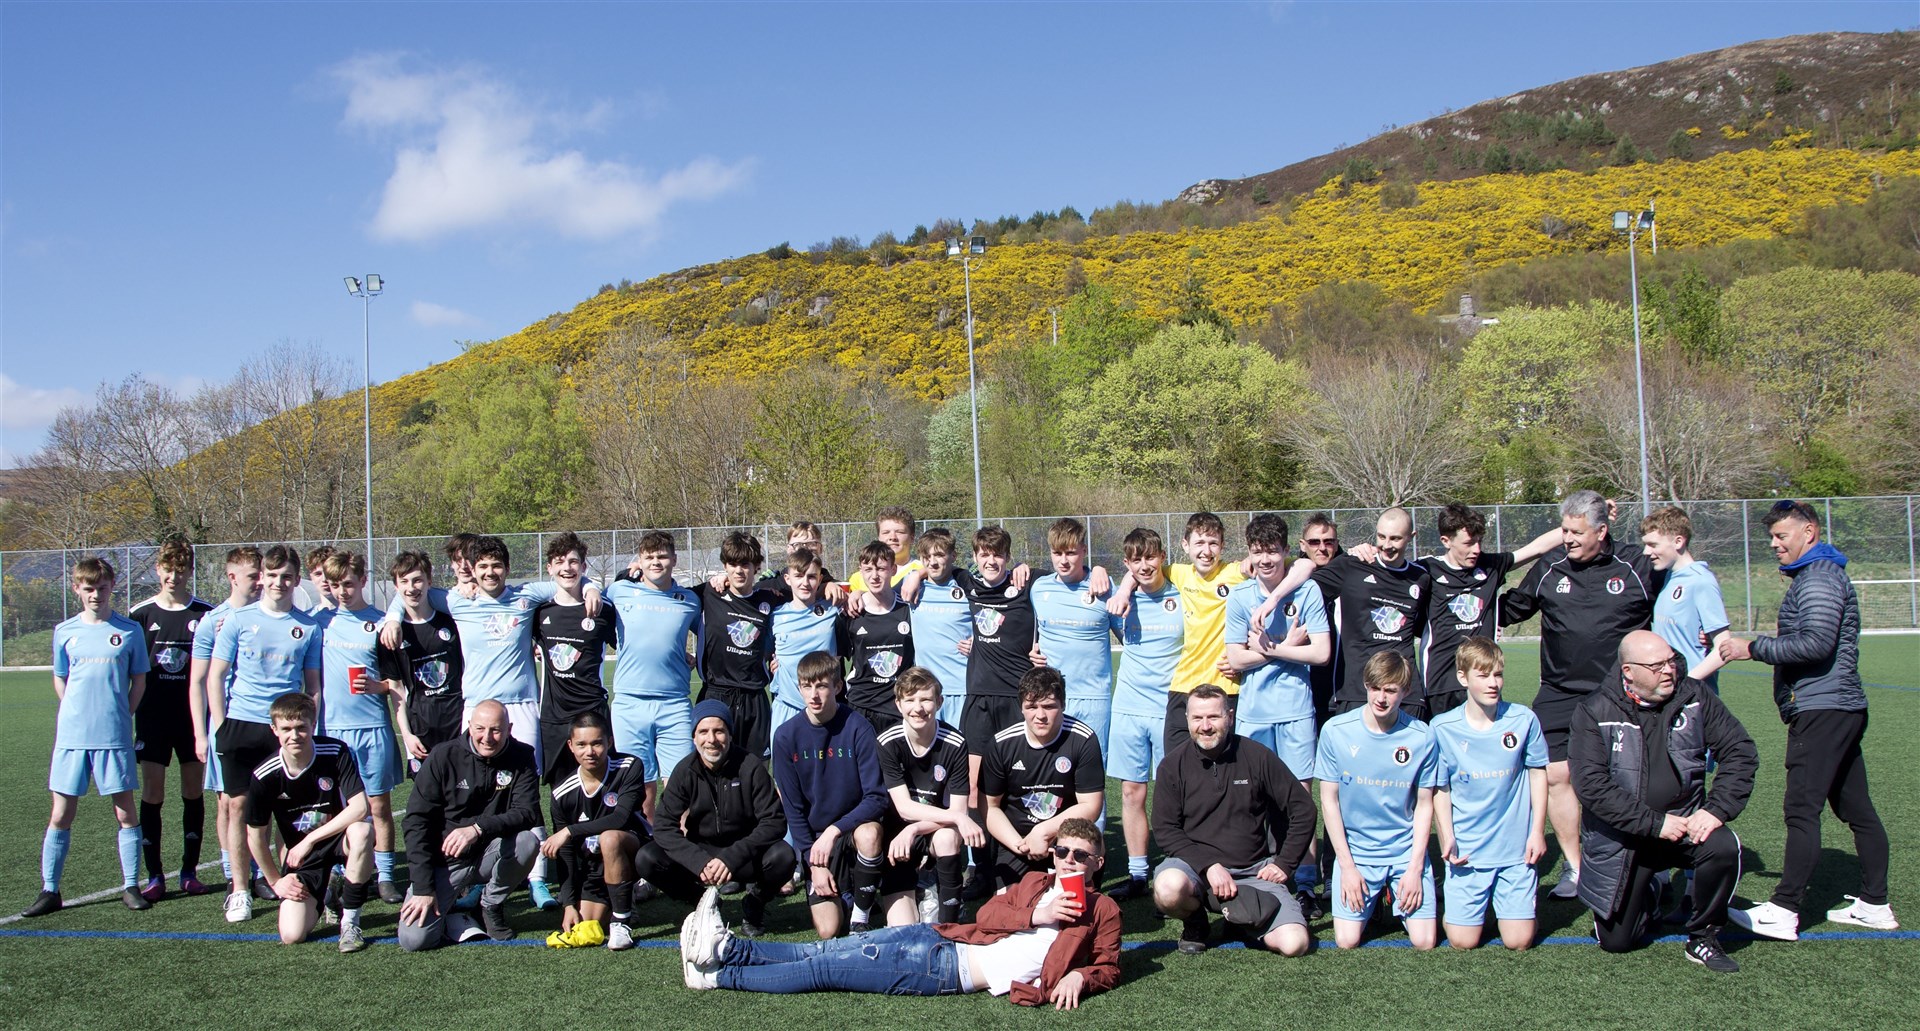 Players of St Duthus FC and Ullapool FC gathered together for a photograph at the end of their game on Sunday. Photo: Mandy McDermid